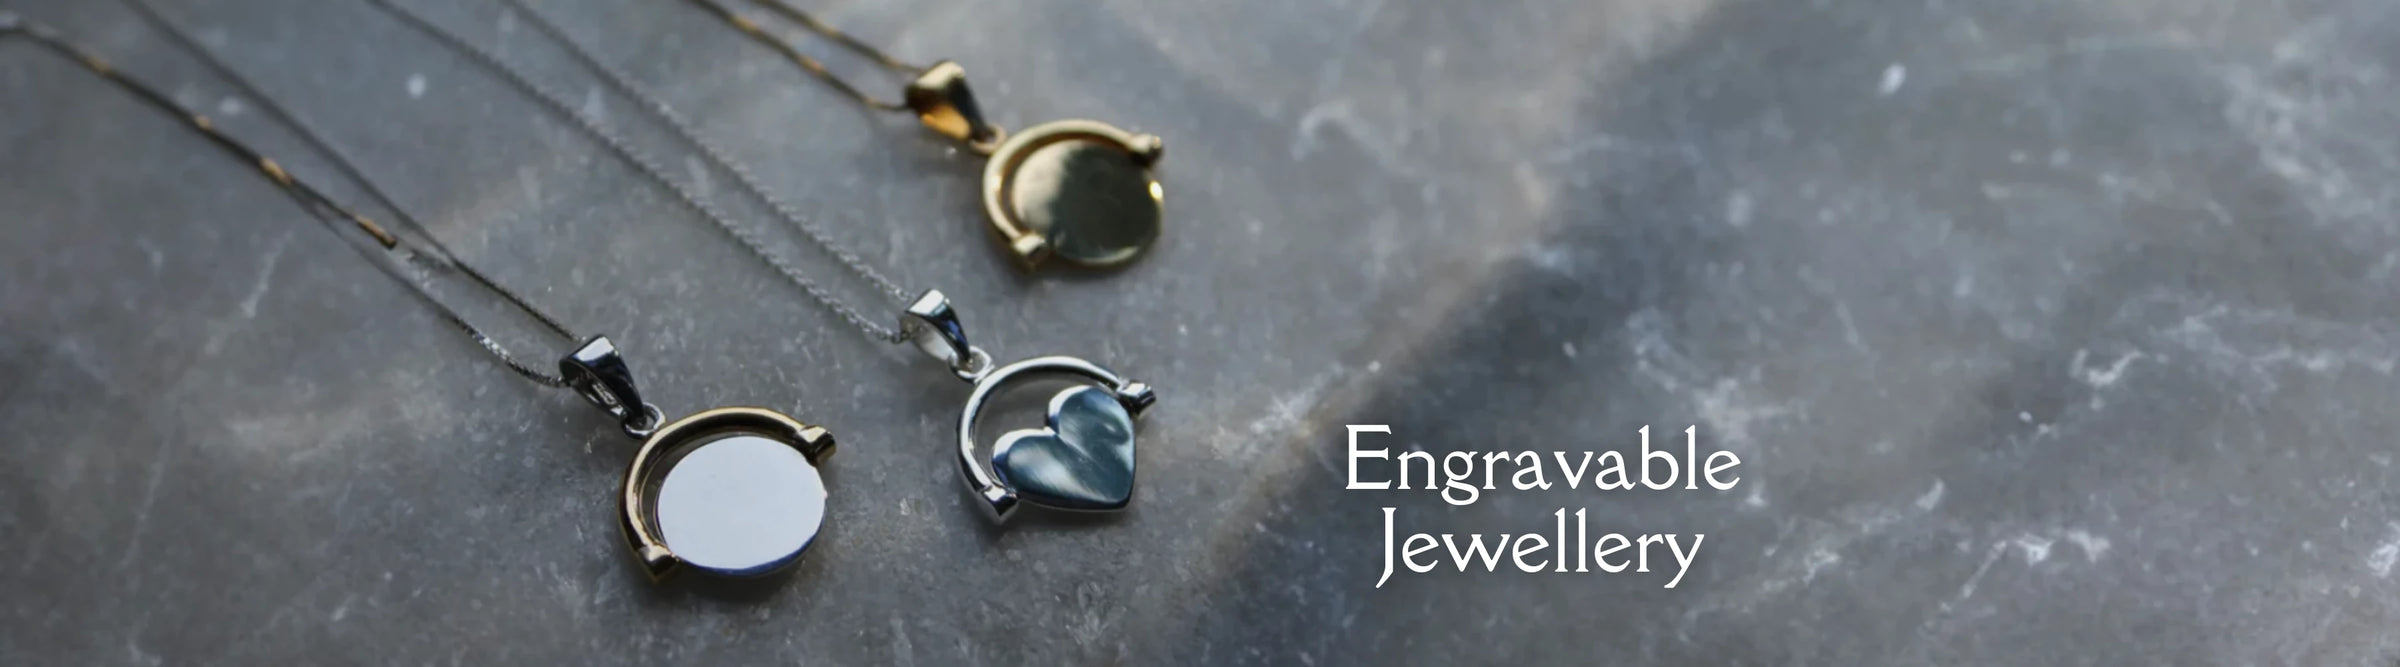 engravable jewellery banner image